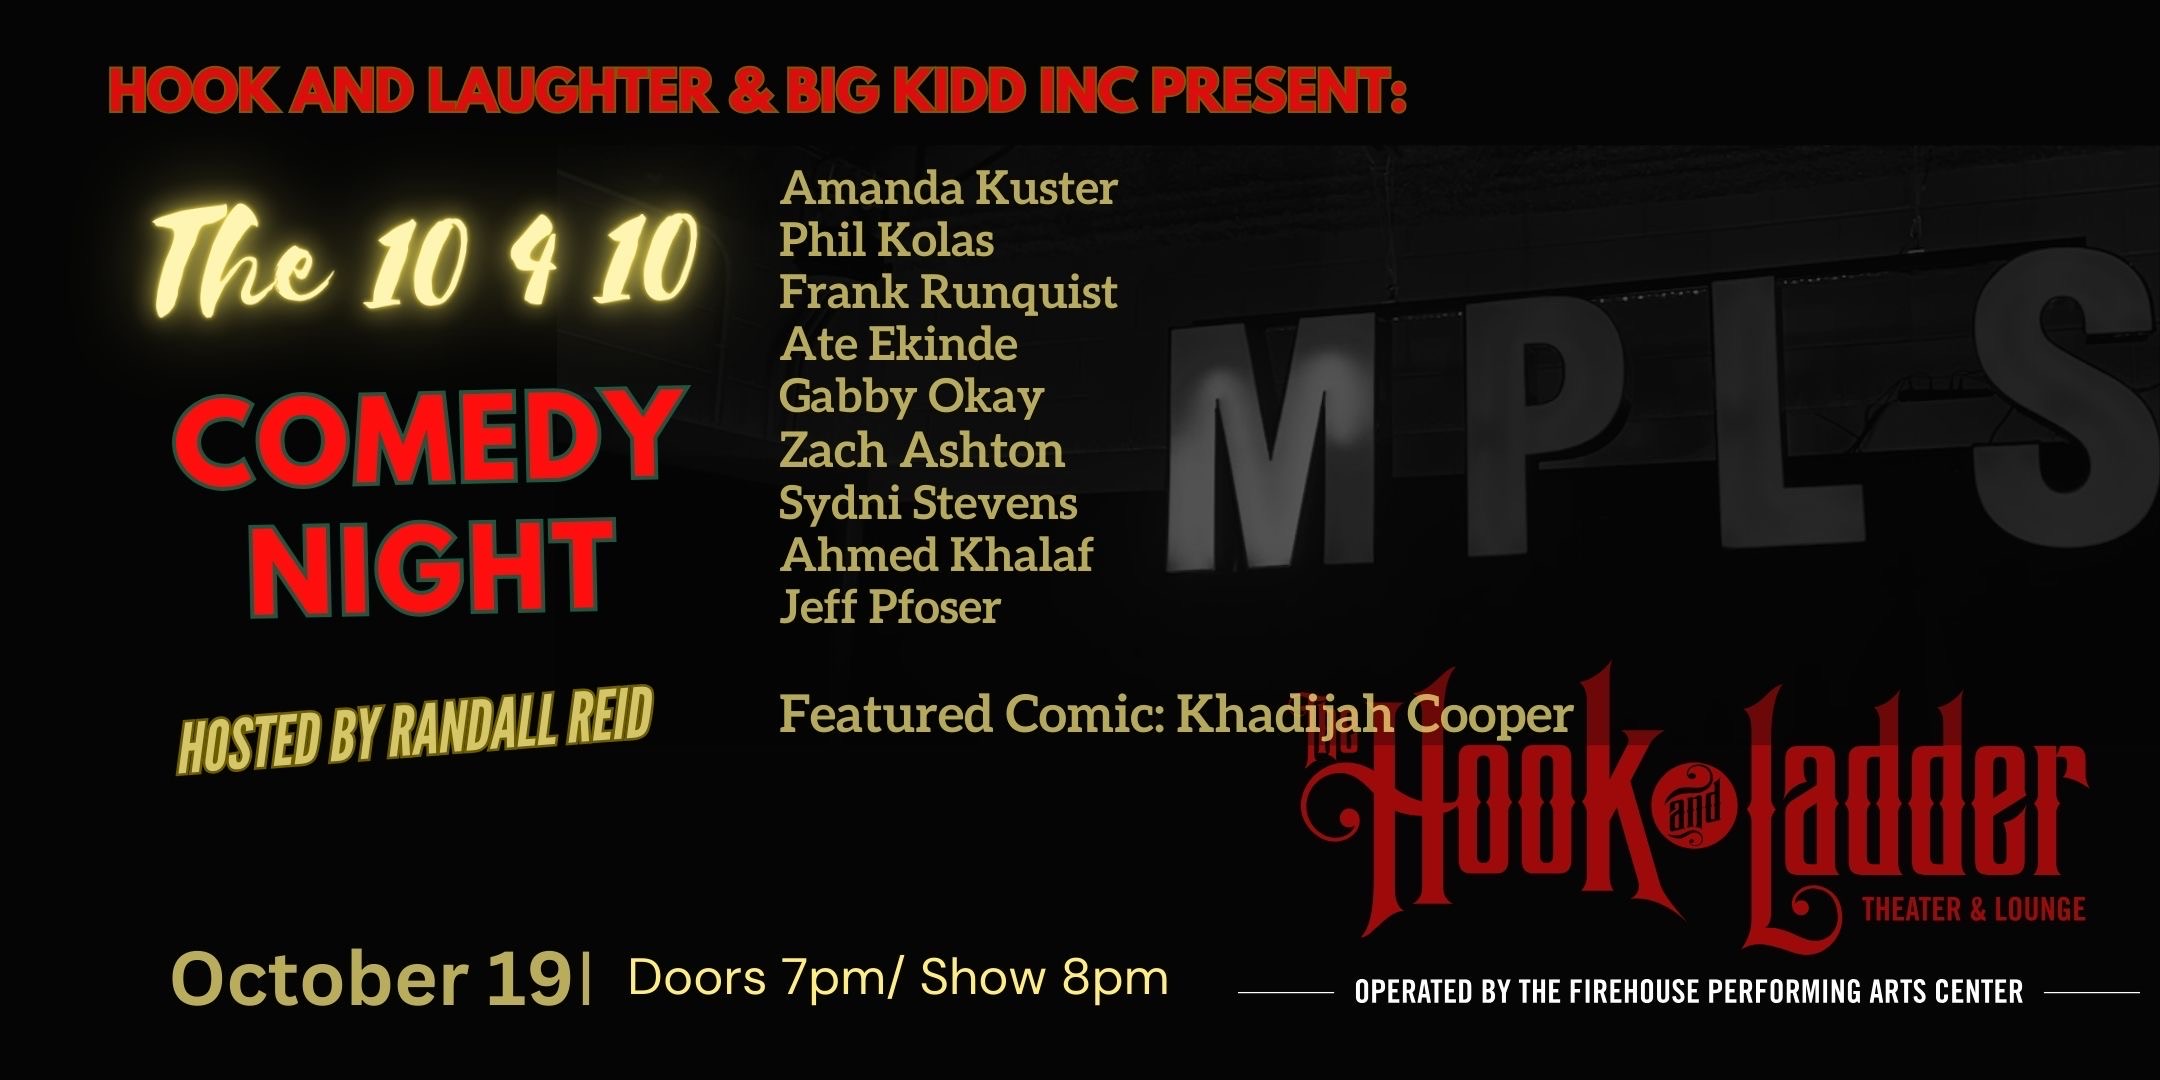 Hook and Laughter and BIGG KIDD INC Present: 'The 10 4 10 Comedy Night' with Amanda Kuster, Phil Kolas, Franky Runquist, Ate Ekinde, Gabby Okay, Zach Ashton, Sydni Stephens, Ahmed Khalaf, Jeff Pfoser, and featured comic, Khadijah Cooper! Thursday, October 19 The Hook and Ladder Theater Doors 7:00pm :: Music 8:00pm :: 21+ GA Seat: $25* Standing Room Only (SRO): $10 ADV / $15 DOS *Seating Available On A First-come First-served Basis